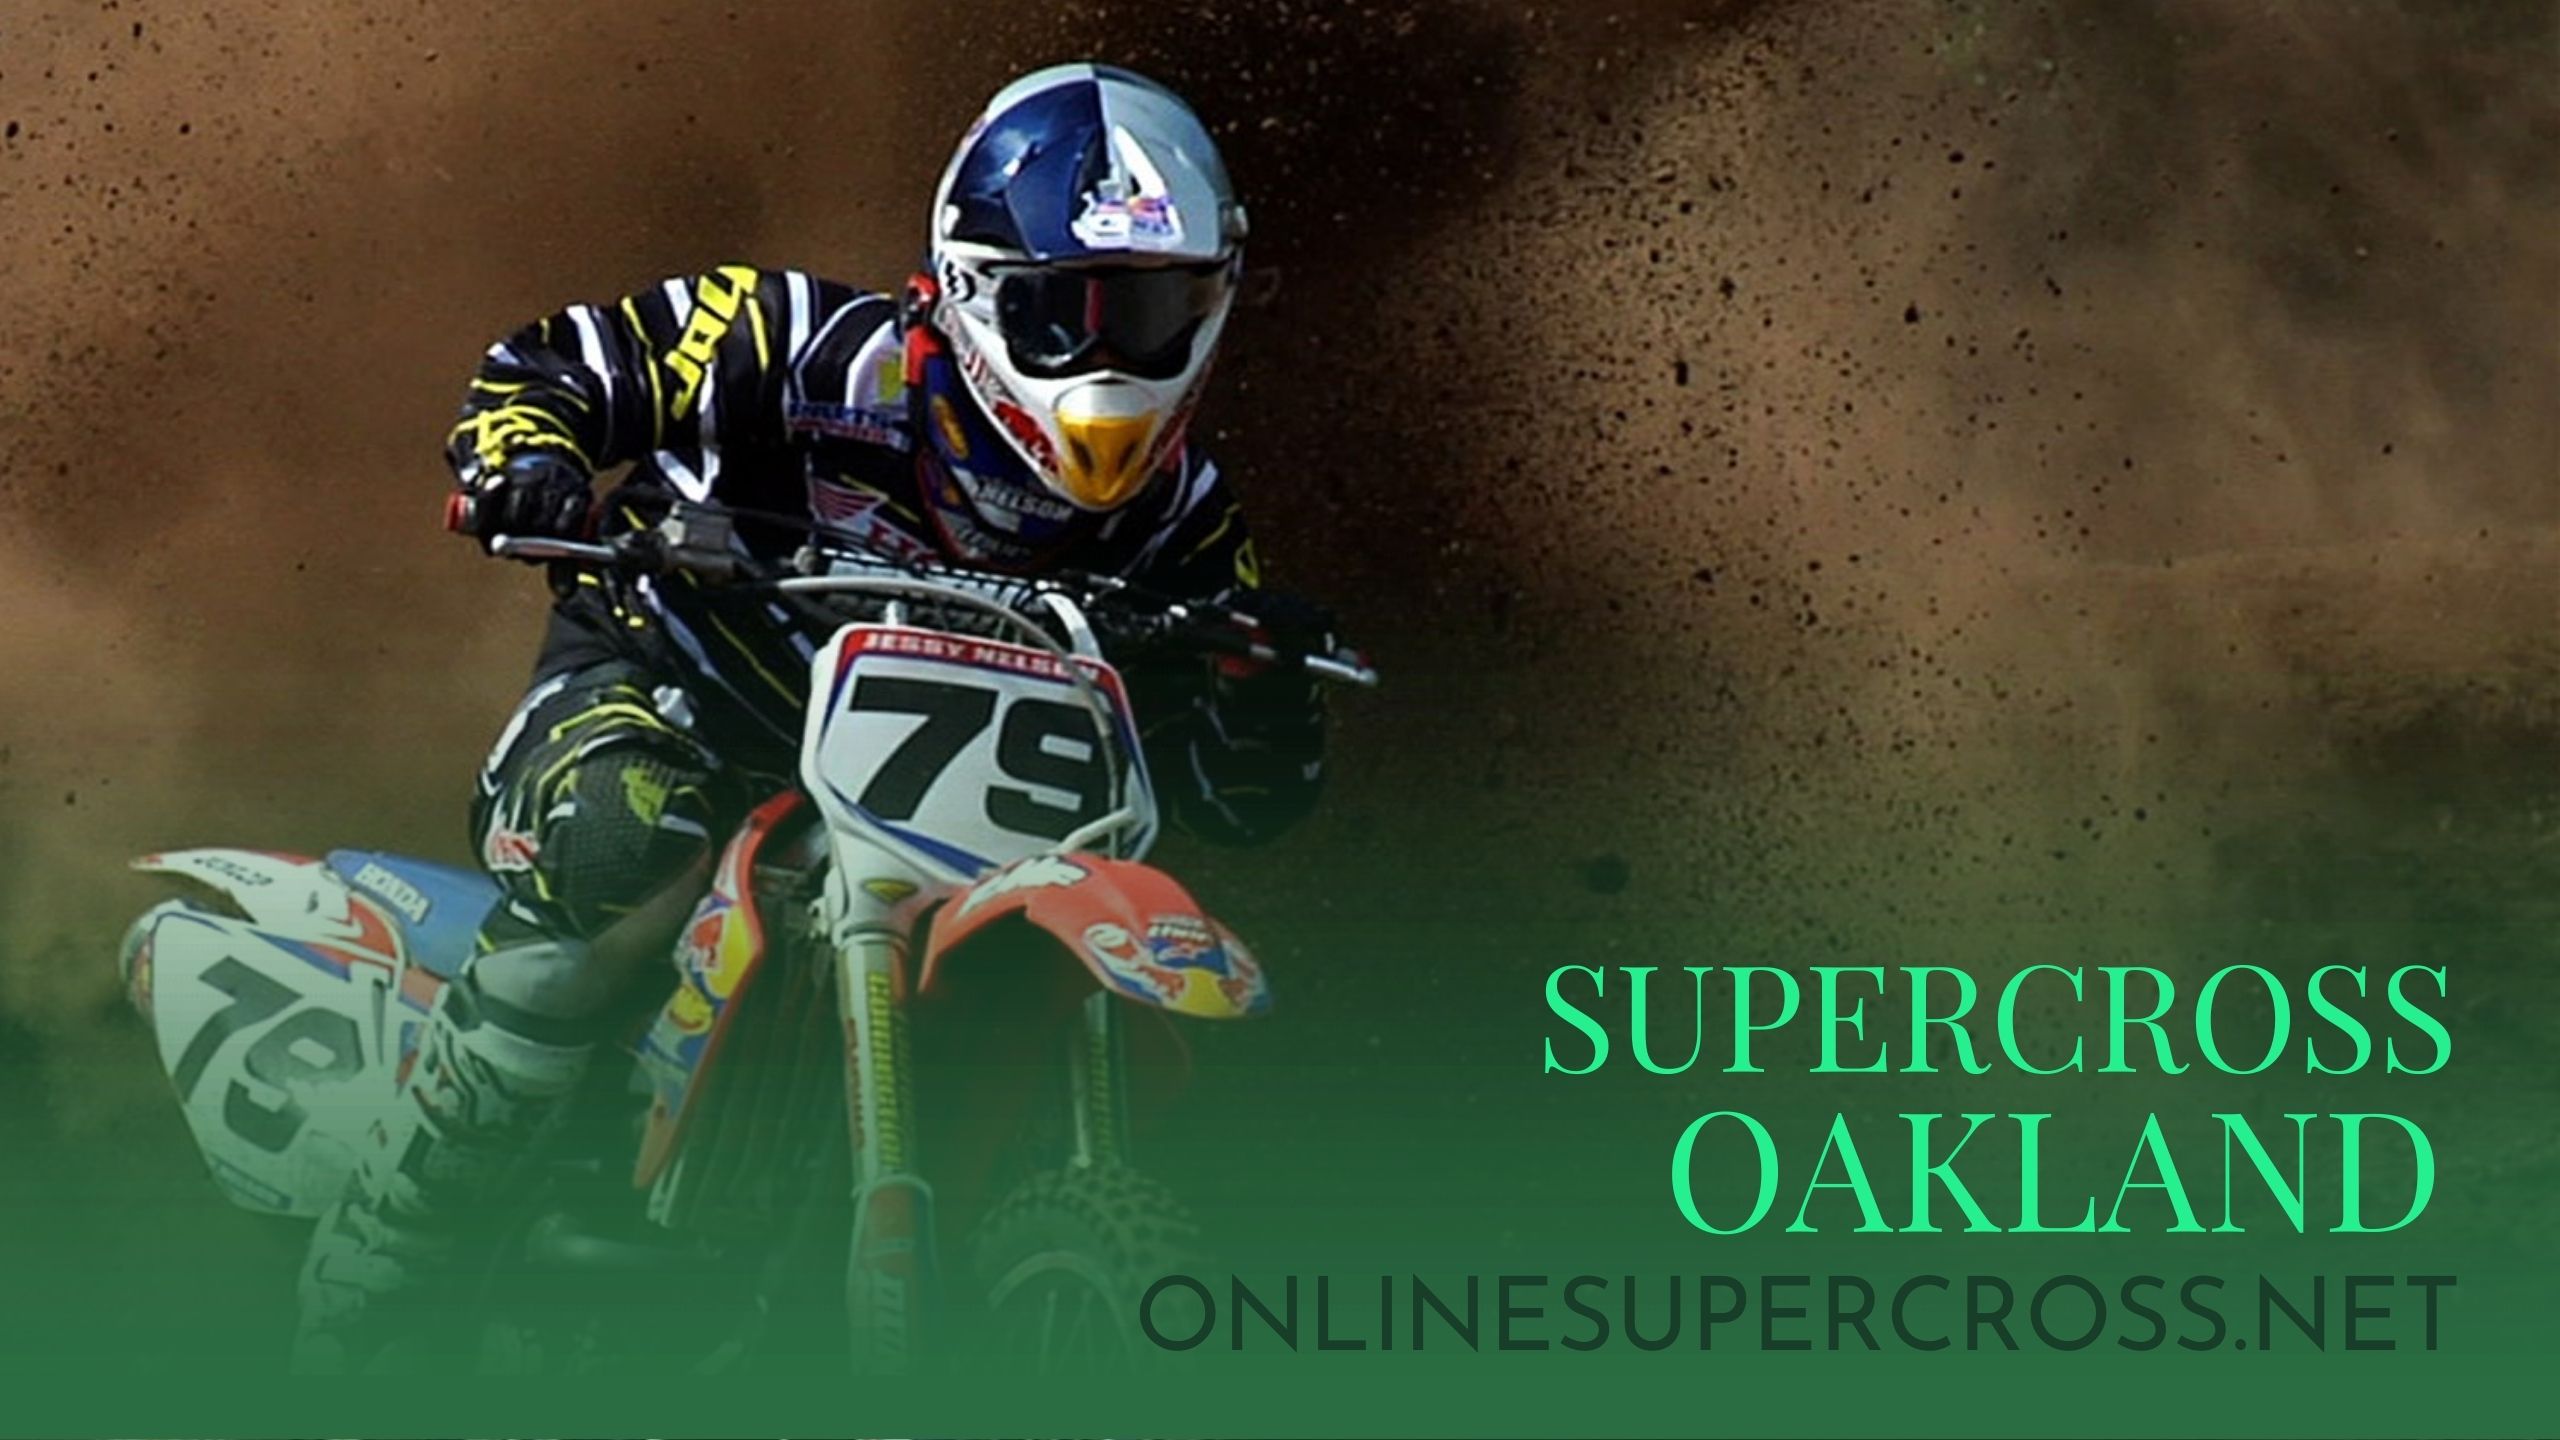 Watch Monster Energy AMA Supercross at Oakland Live